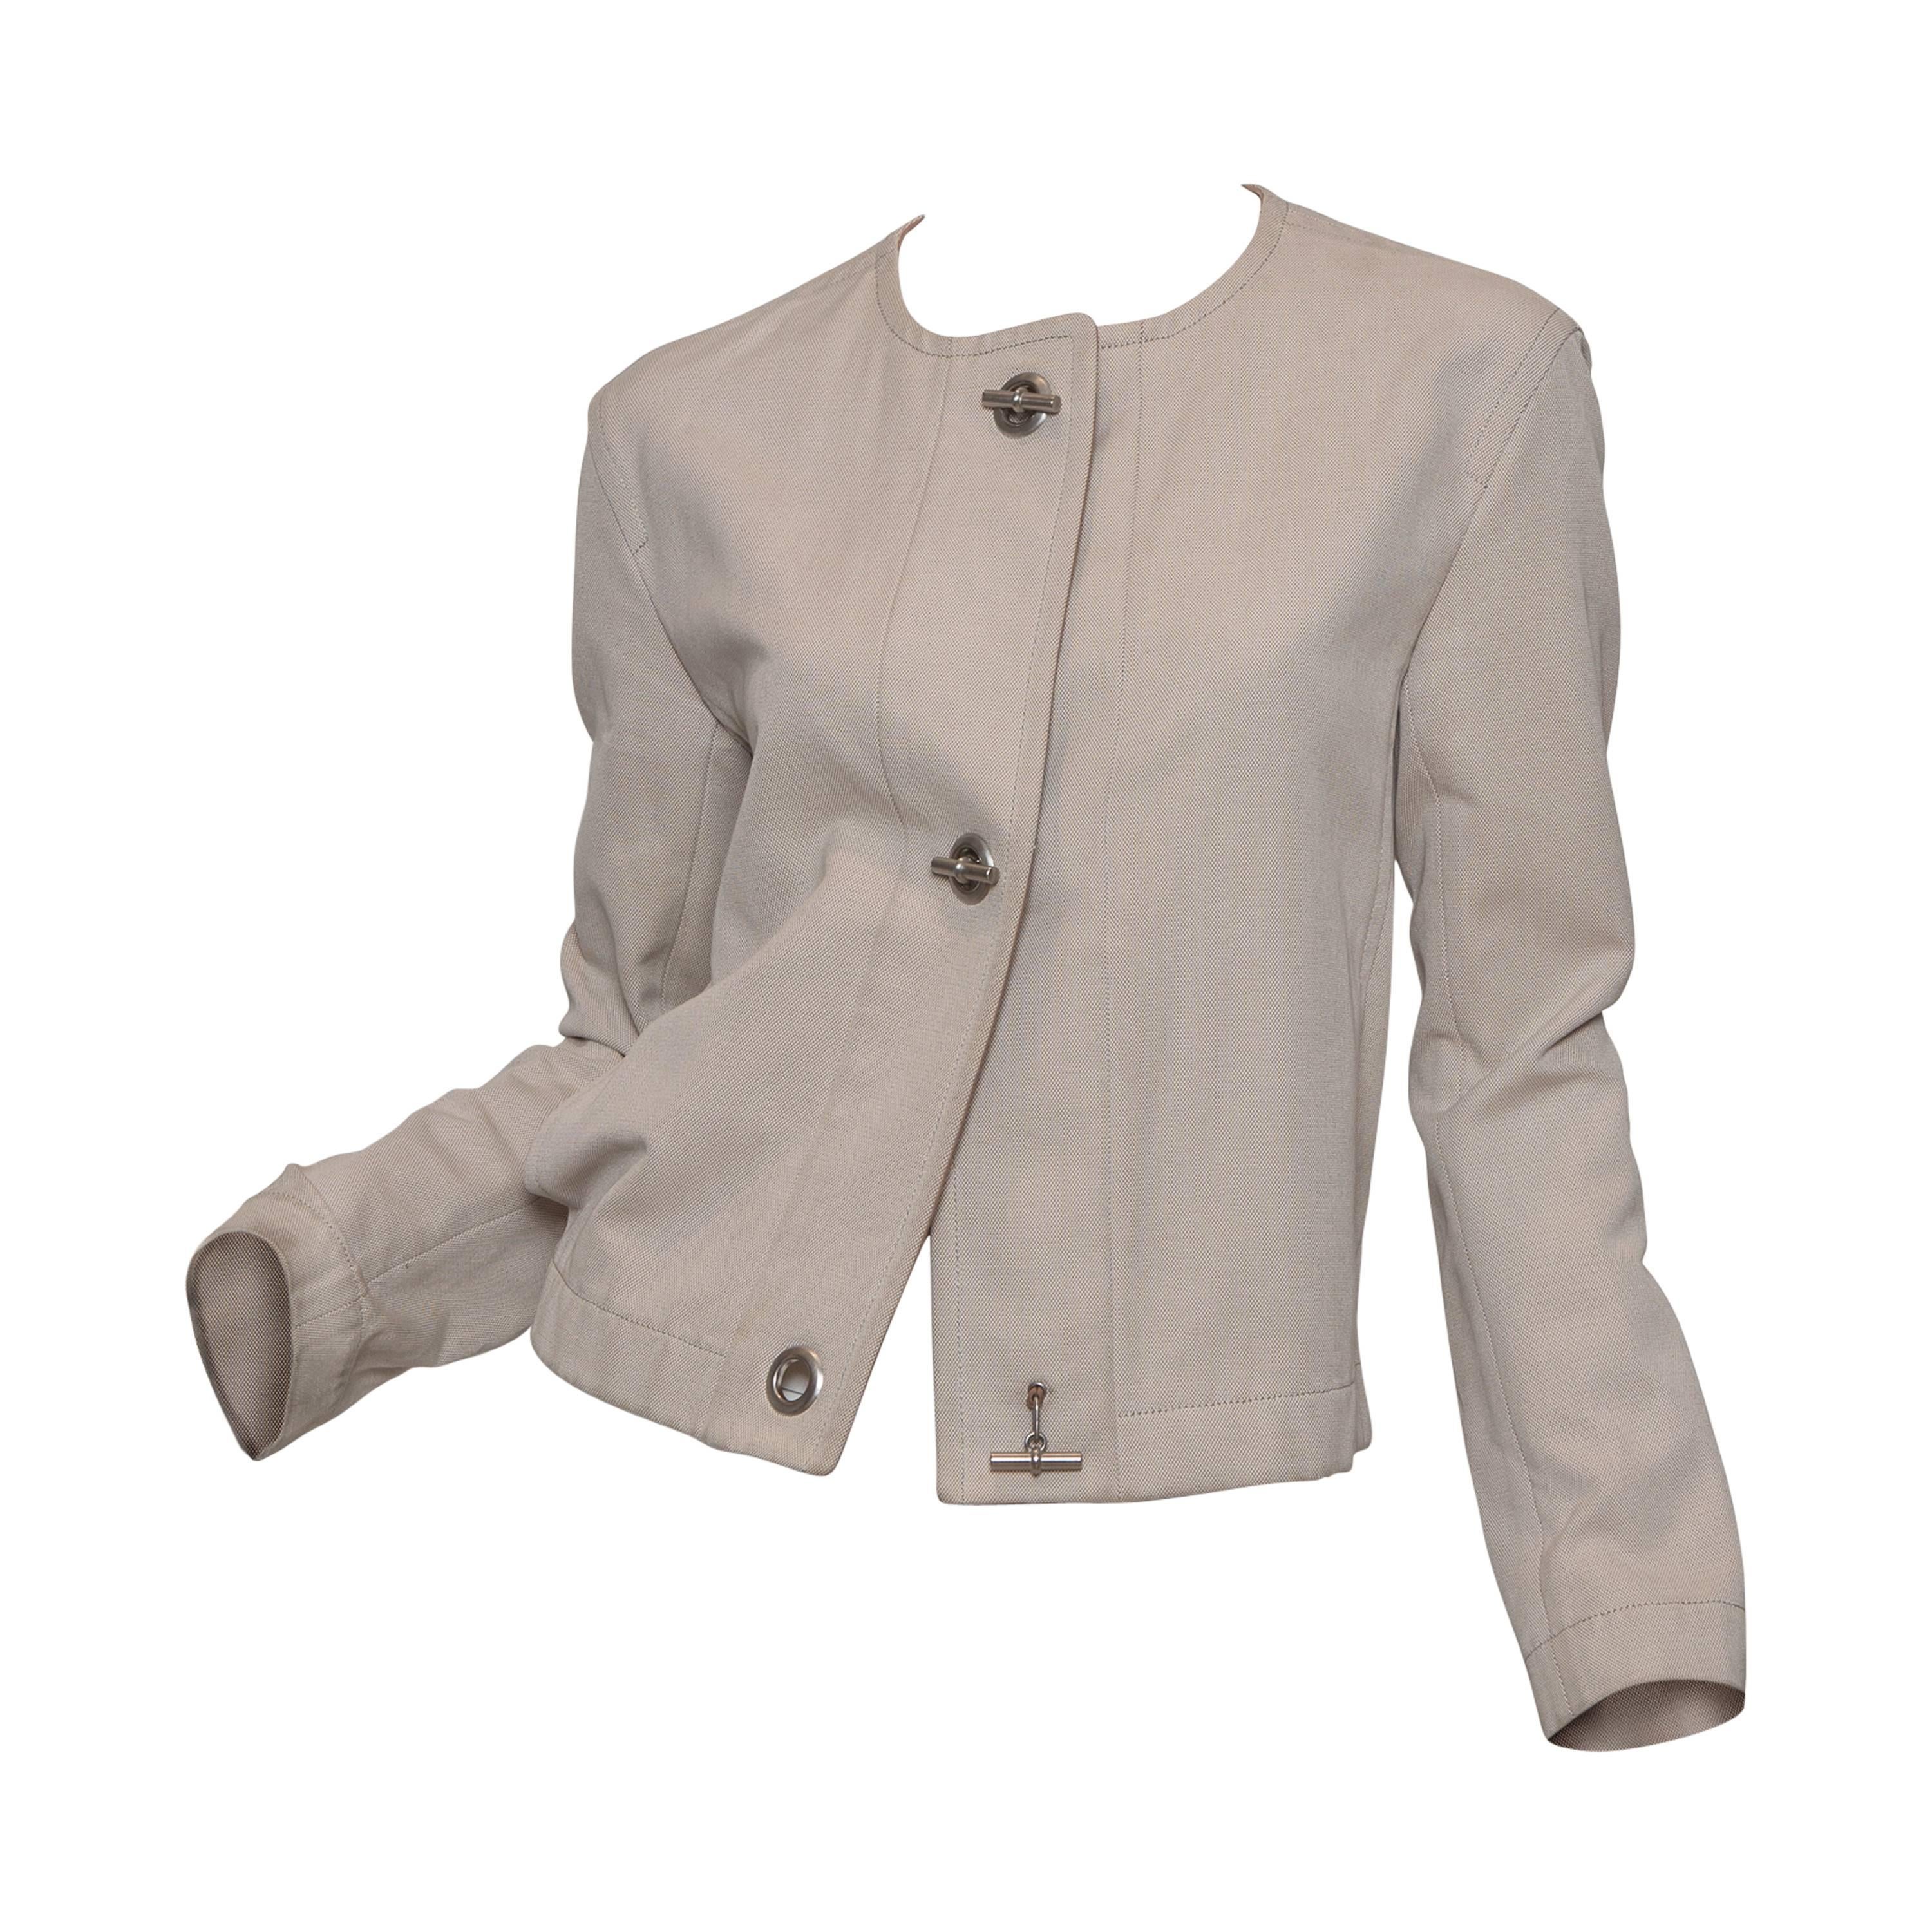 Hermes Tan Cotton Jacket with Silver Toggles